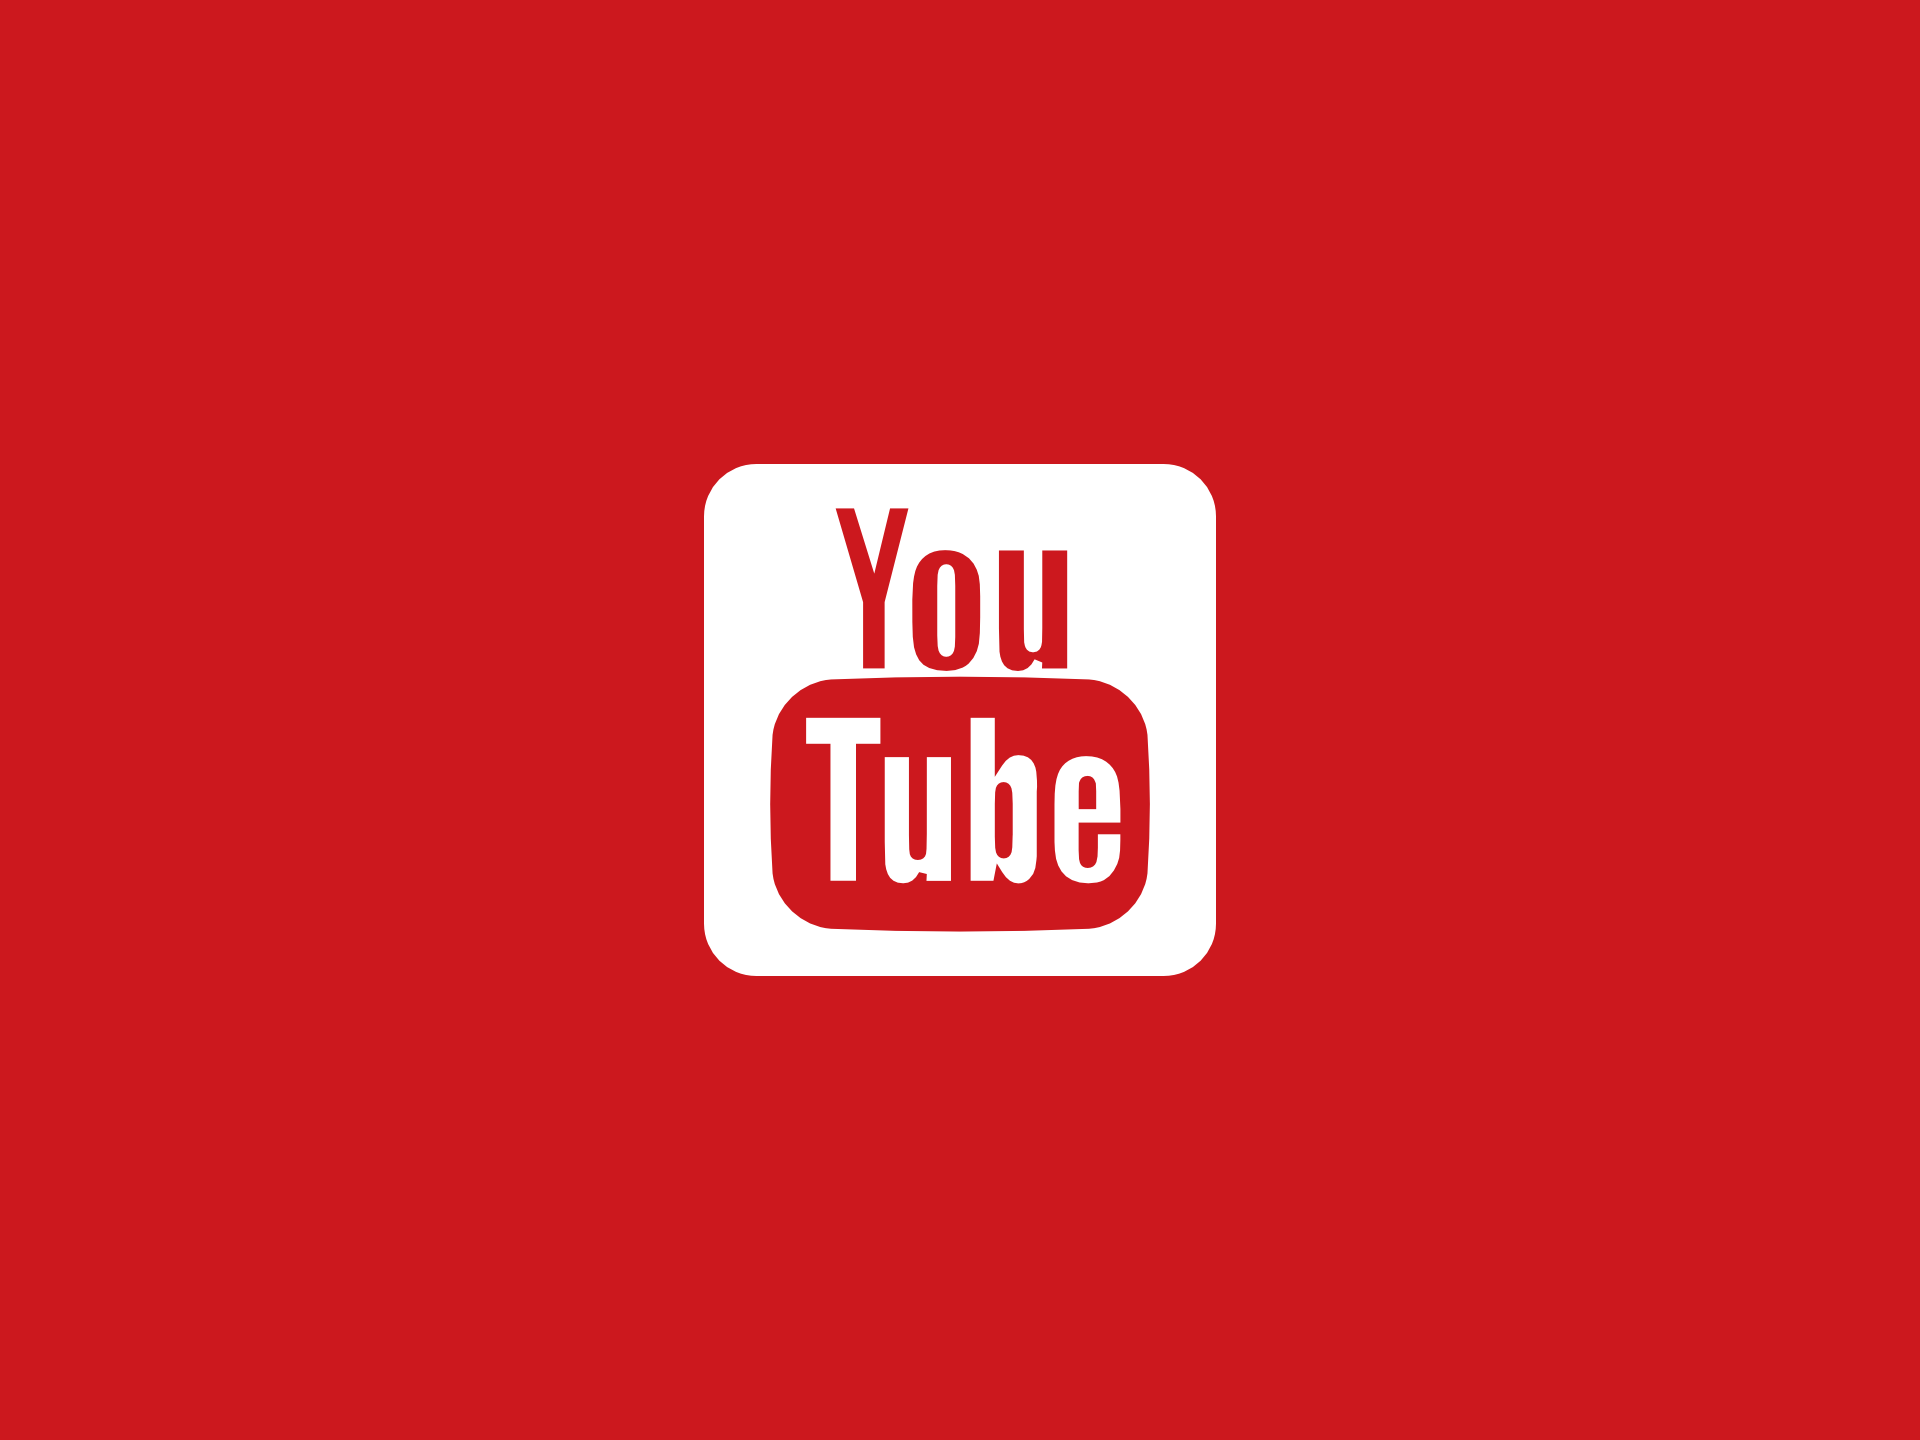 Searching videos on YouTube with jQuery and the YouTube Google APIs